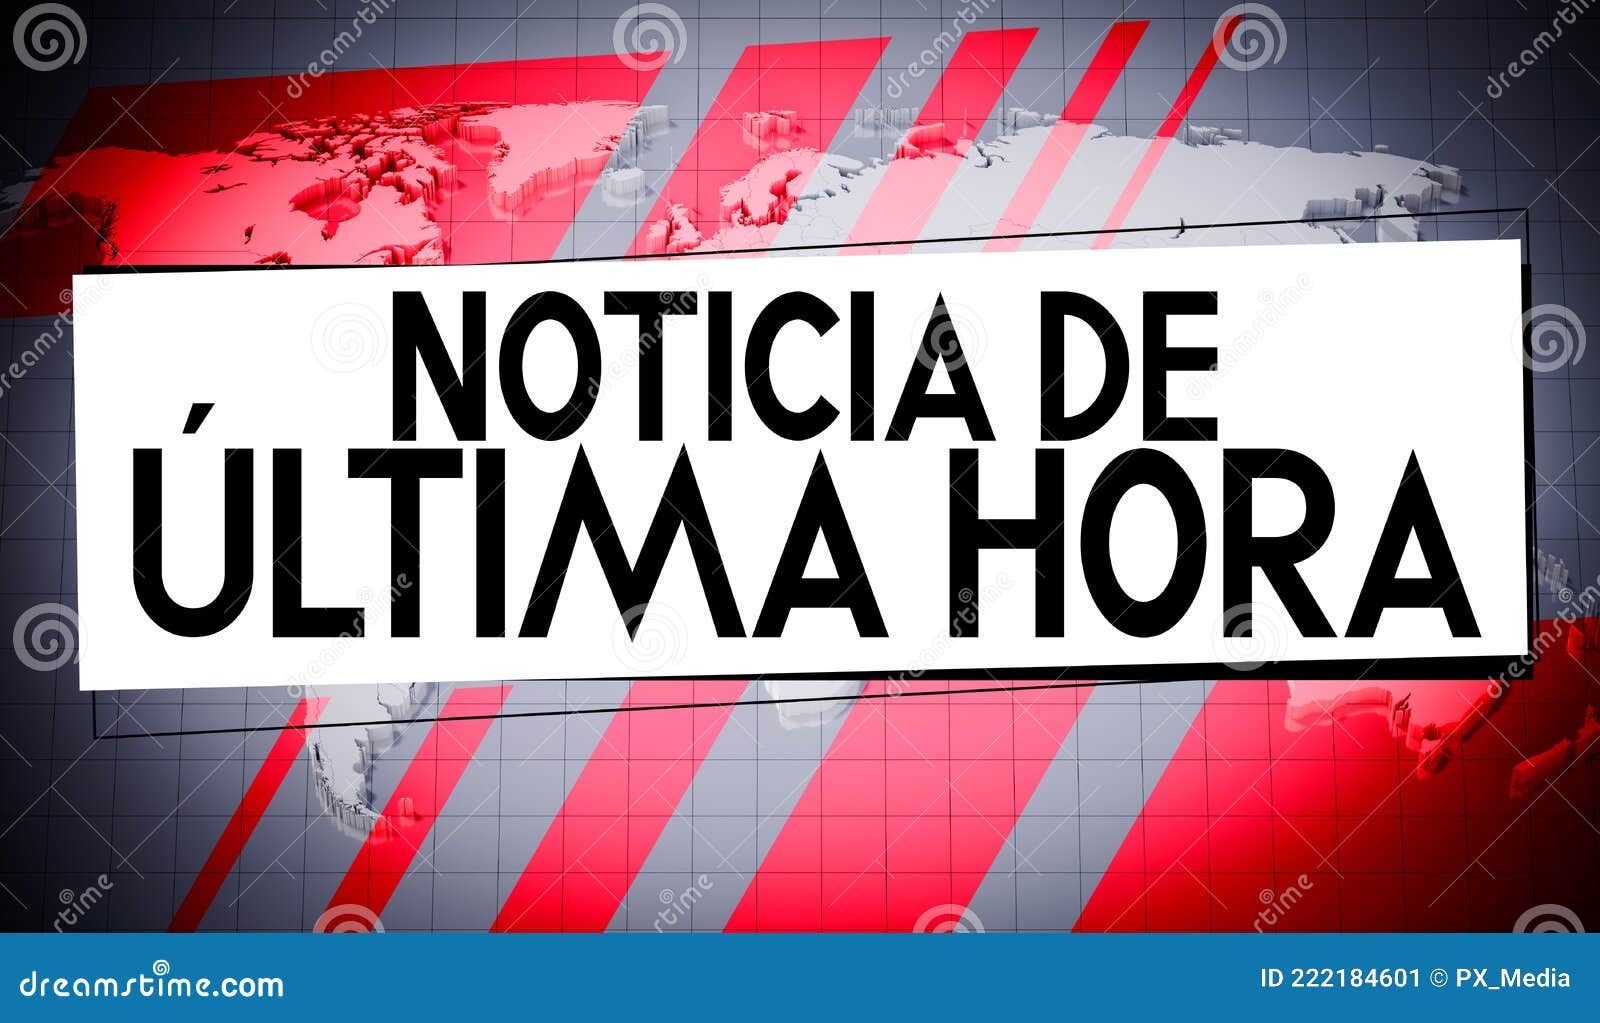 noticia de ultima hora spanish / breaking news english, world map in background